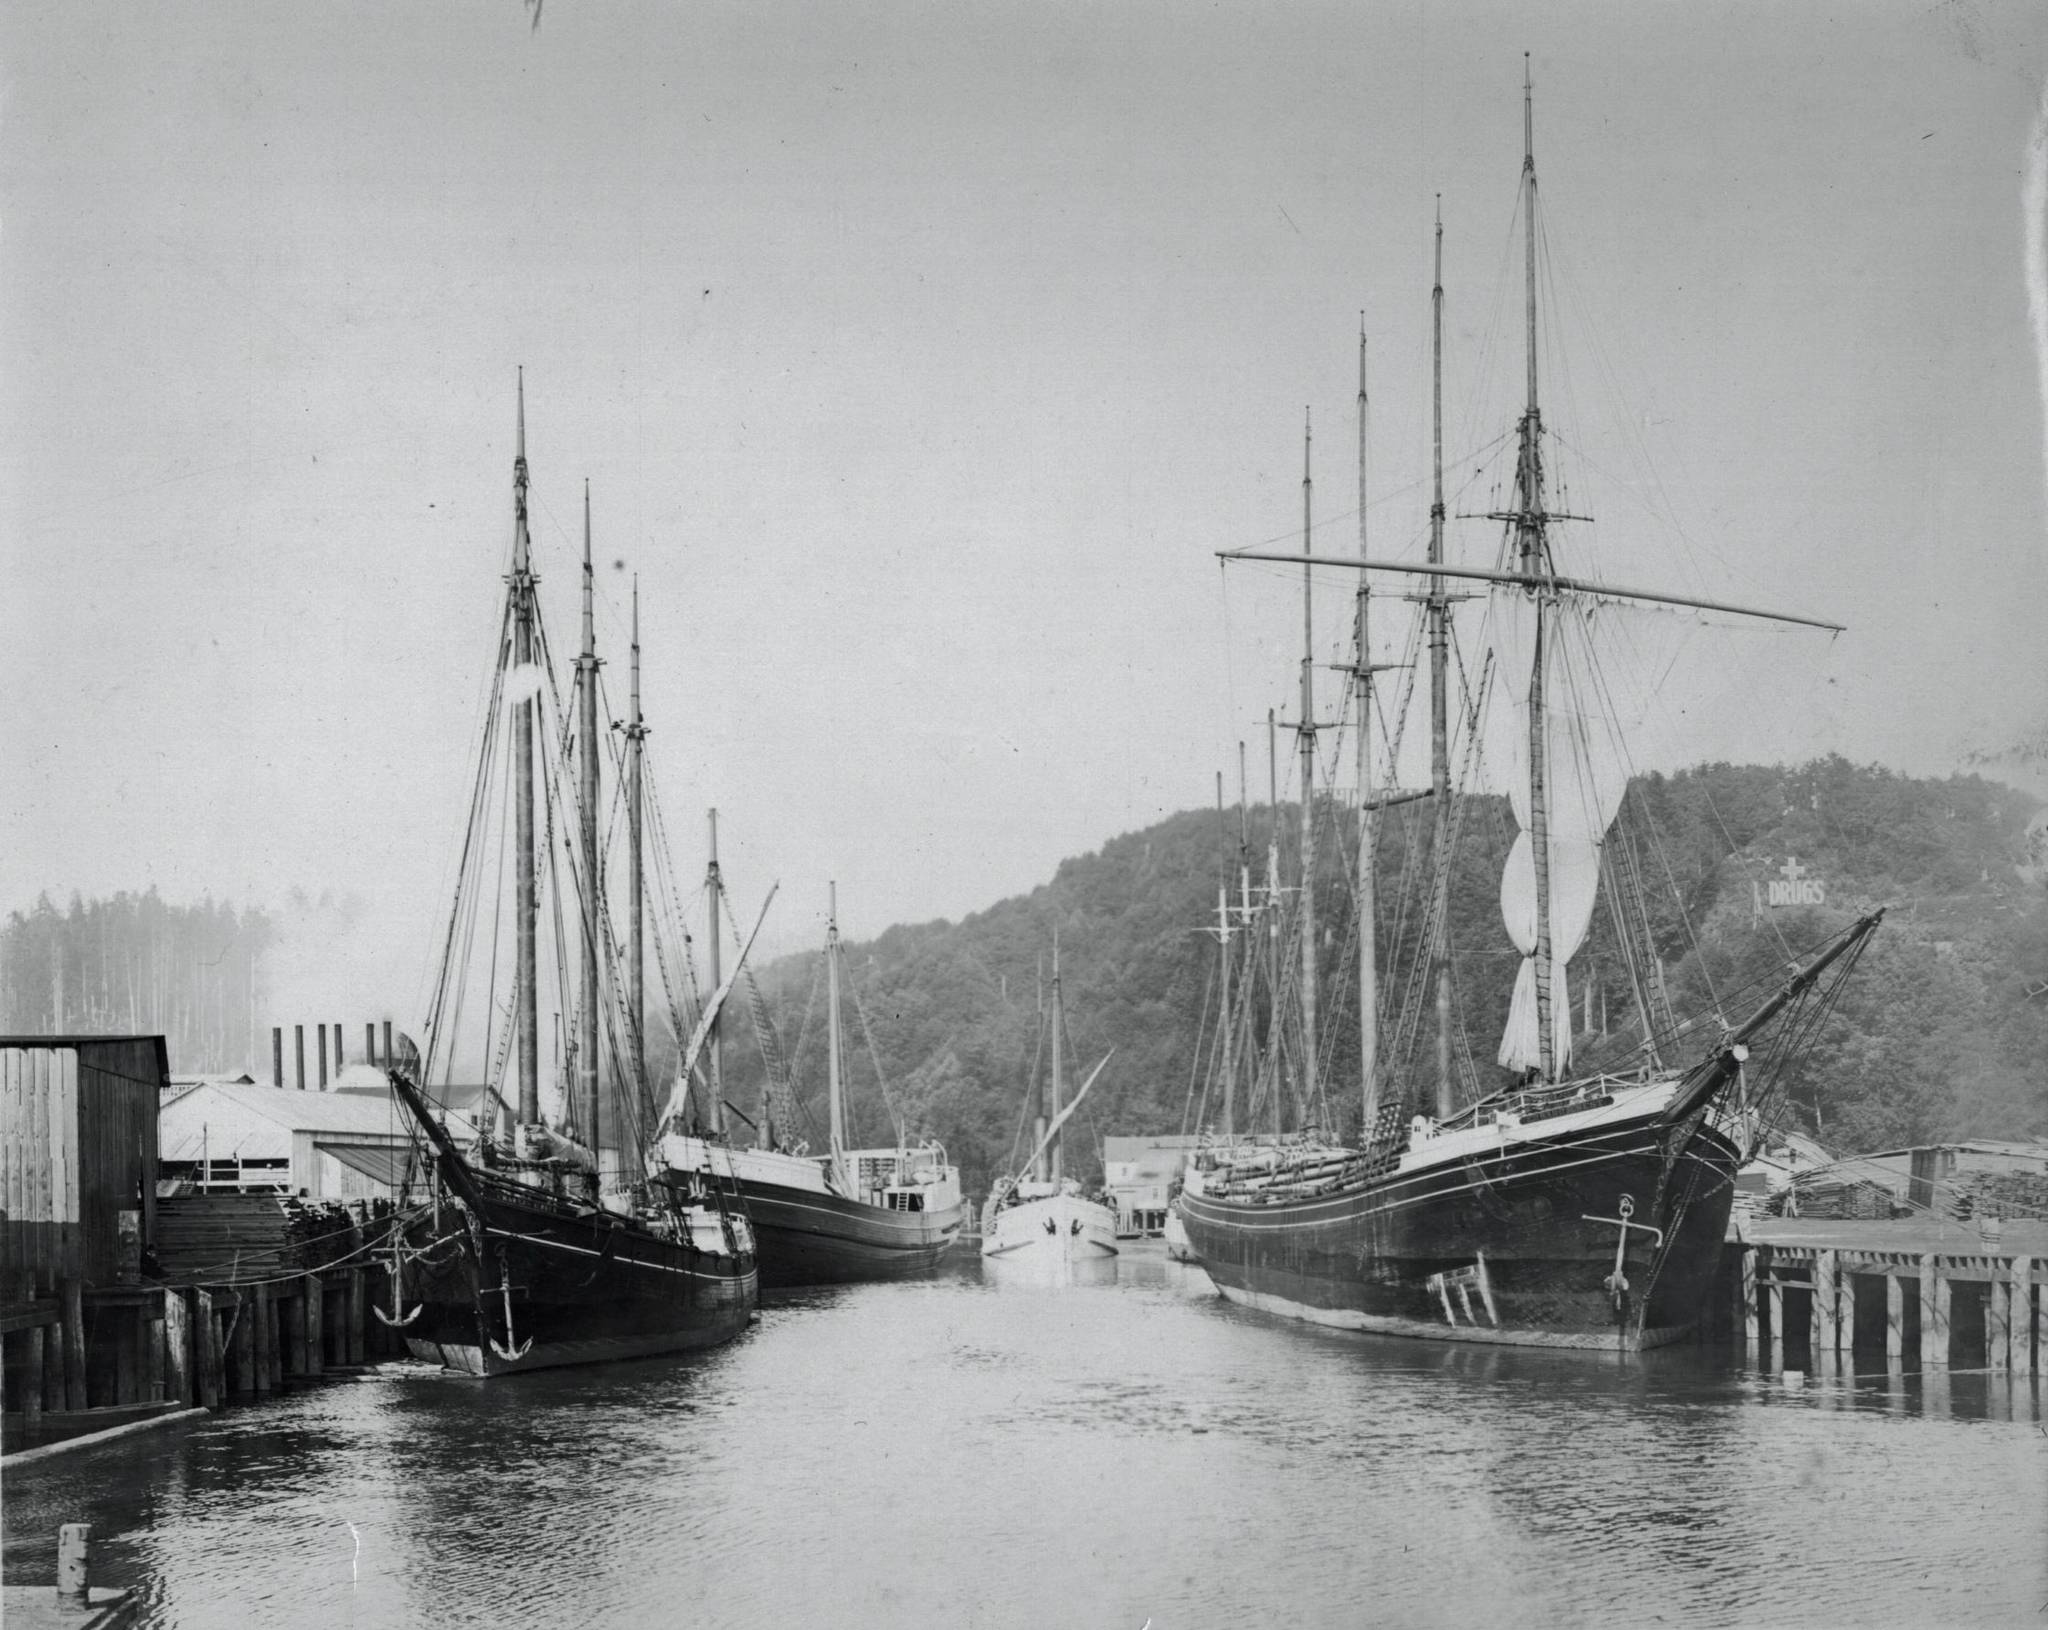 The Wishkah riverfront was lined with lumber schooners in downtown Aberdeen during years Billy Gohl was active as agent for the Sailors’ Union of the Pacific.